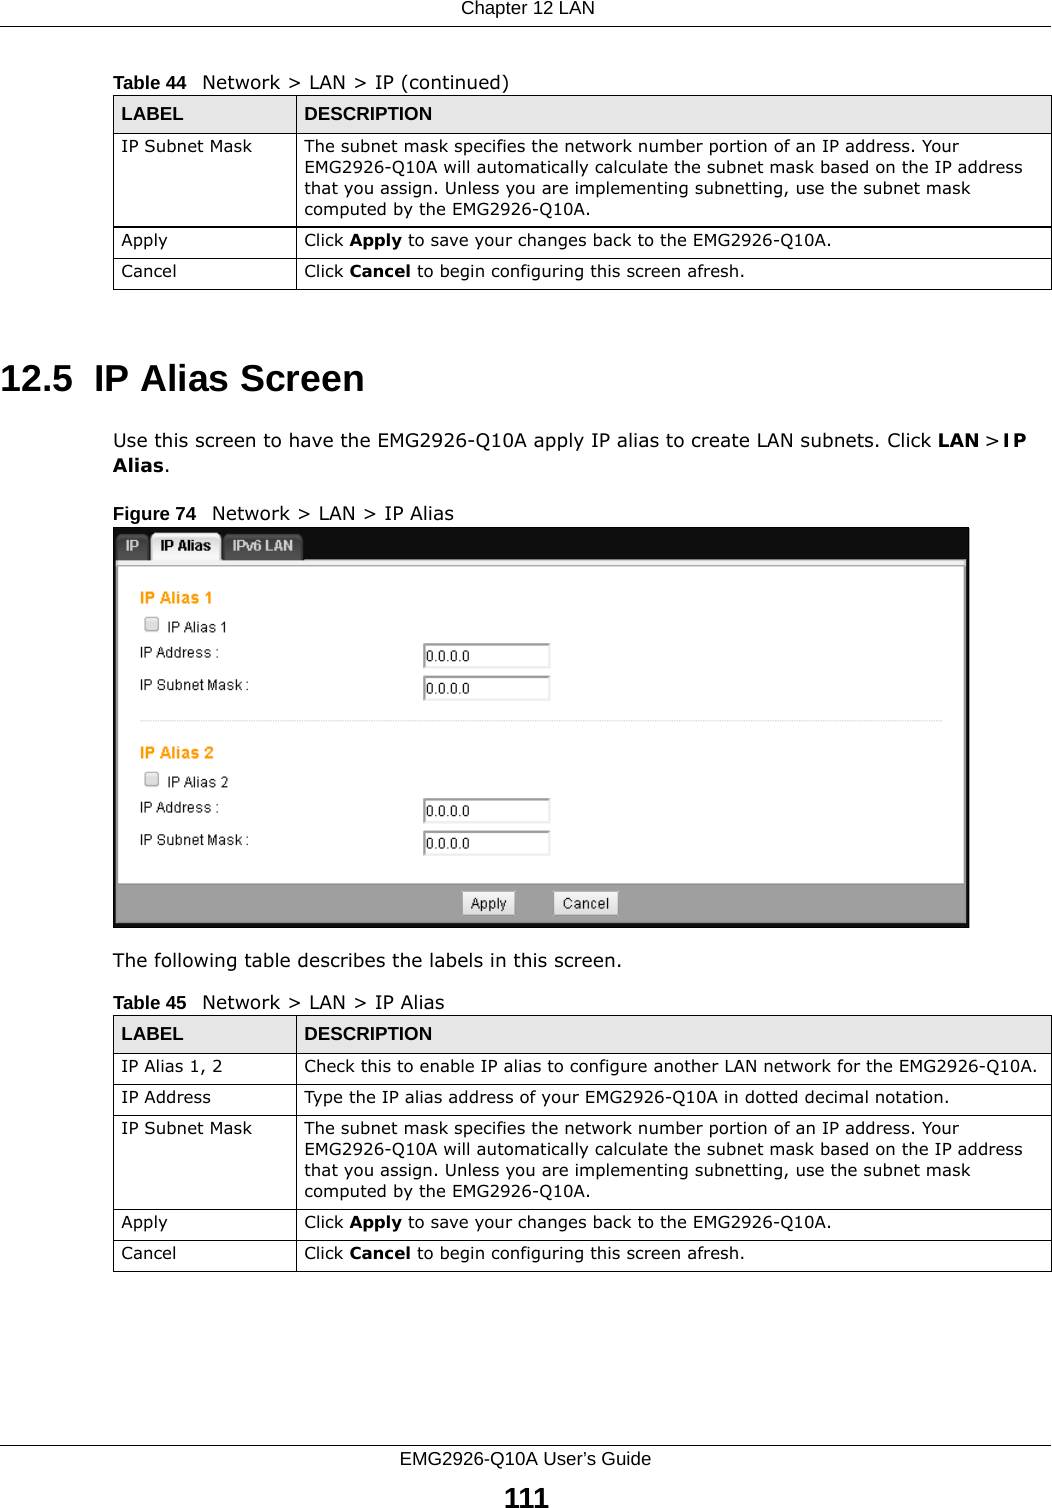  Chapter 12 LANEMG2926-Q10A User’s Guide11112.5  IP Alias ScreenUse this screen to have the EMG2926-Q10A apply IP alias to create LAN subnets. Click LAN &gt; IP Alias.Figure 74   Network &gt; LAN &gt; IP Alias The following table describes the labels in this screen.IP Subnet Mask The subnet mask specifies the network number portion of an IP address. Your EMG2926-Q10A will automatically calculate the subnet mask based on the IP address that you assign. Unless you are implementing subnetting, use the subnet mask computed by the EMG2926-Q10A.Apply Click Apply to save your changes back to the EMG2926-Q10A.Cancel Click Cancel to begin configuring this screen afresh.Table 44   Network &gt; LAN &gt; IP (continued)LABEL DESCRIPTIONTable 45   Network &gt; LAN &gt; IP AliasLABEL DESCRIPTIONIP Alias 1, 2 Check this to enable IP alias to configure another LAN network for the EMG2926-Q10A.IP Address Type the IP alias address of your EMG2926-Q10A in dotted decimal notation.IP Subnet Mask The subnet mask specifies the network number portion of an IP address. Your EMG2926-Q10A will automatically calculate the subnet mask based on the IP address that you assign. Unless you are implementing subnetting, use the subnet mask computed by the EMG2926-Q10A.Apply Click Apply to save your changes back to the EMG2926-Q10A.Cancel Click Cancel to begin configuring this screen afresh.